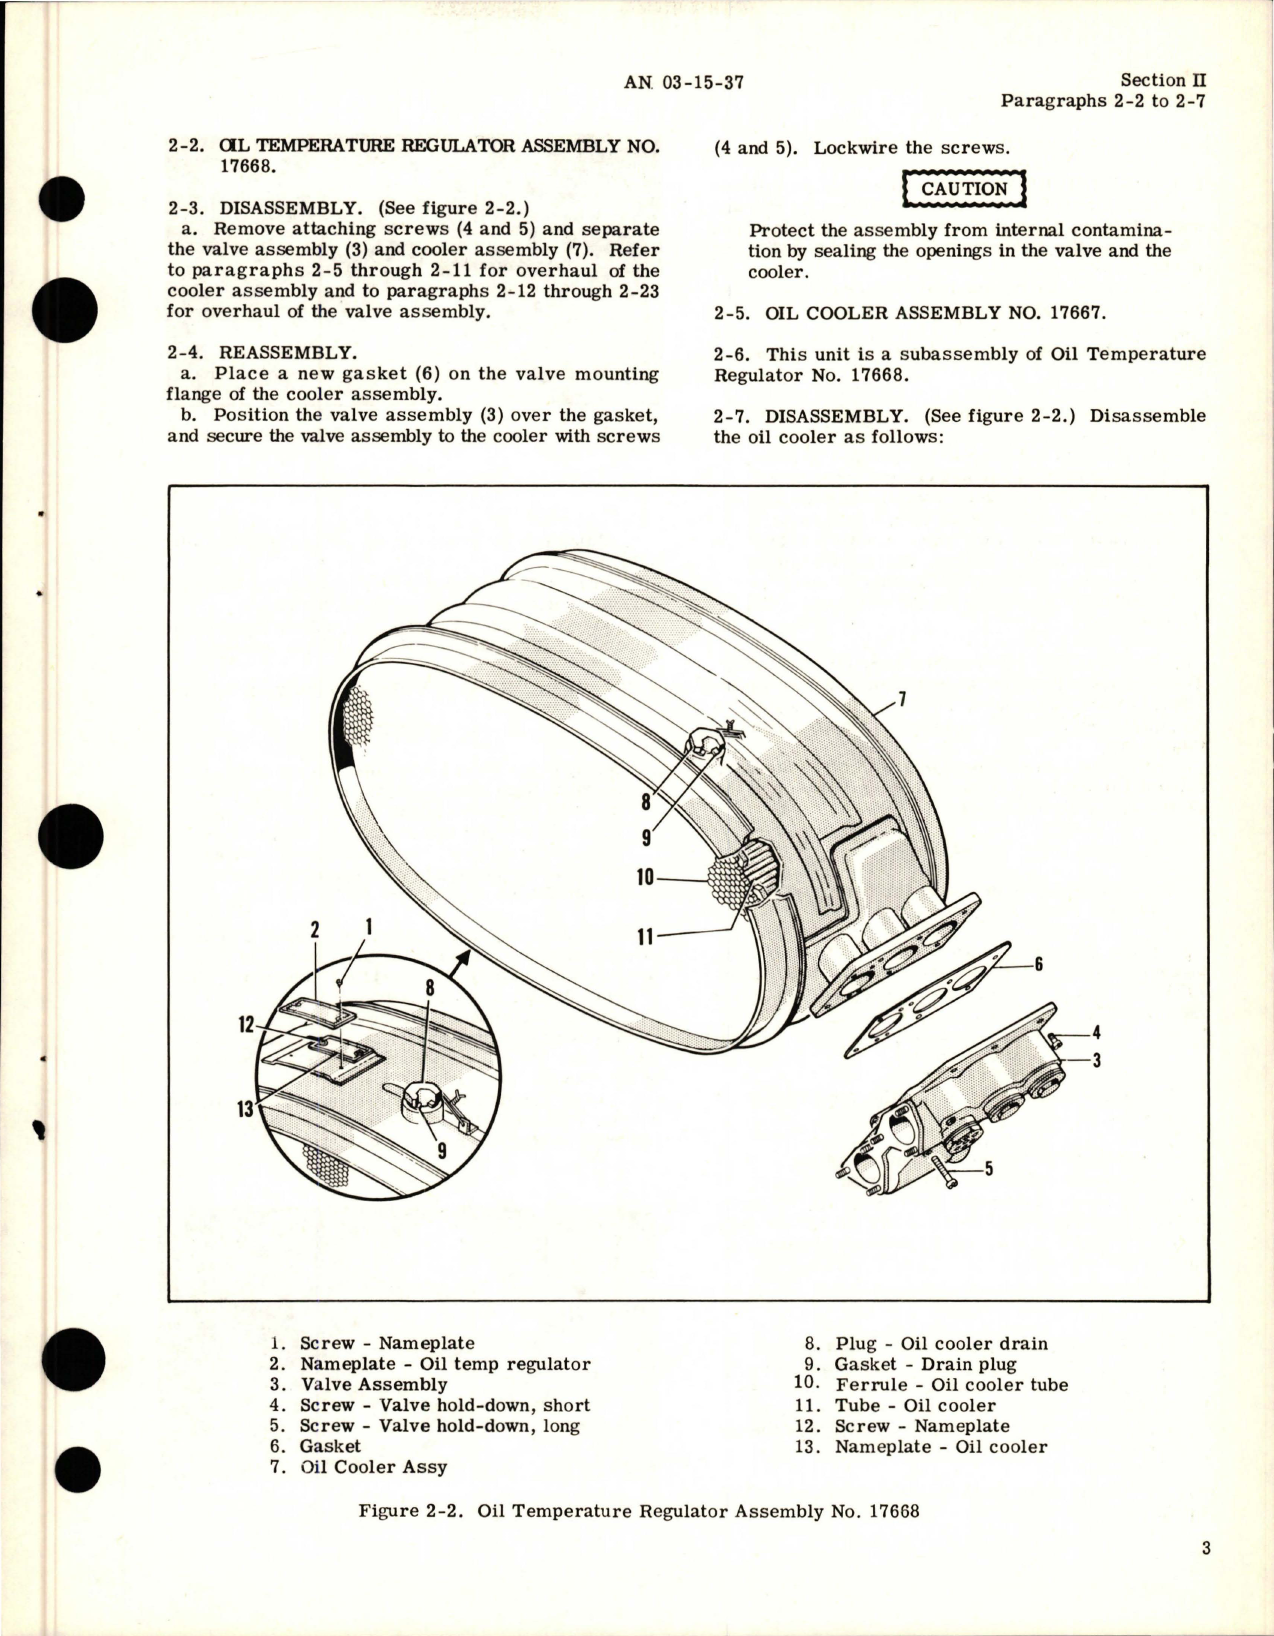 Sample page 9 from AirCorps Library document: Overhaul Instructions for Oil Temperature Regulators Oil Coolers Valves